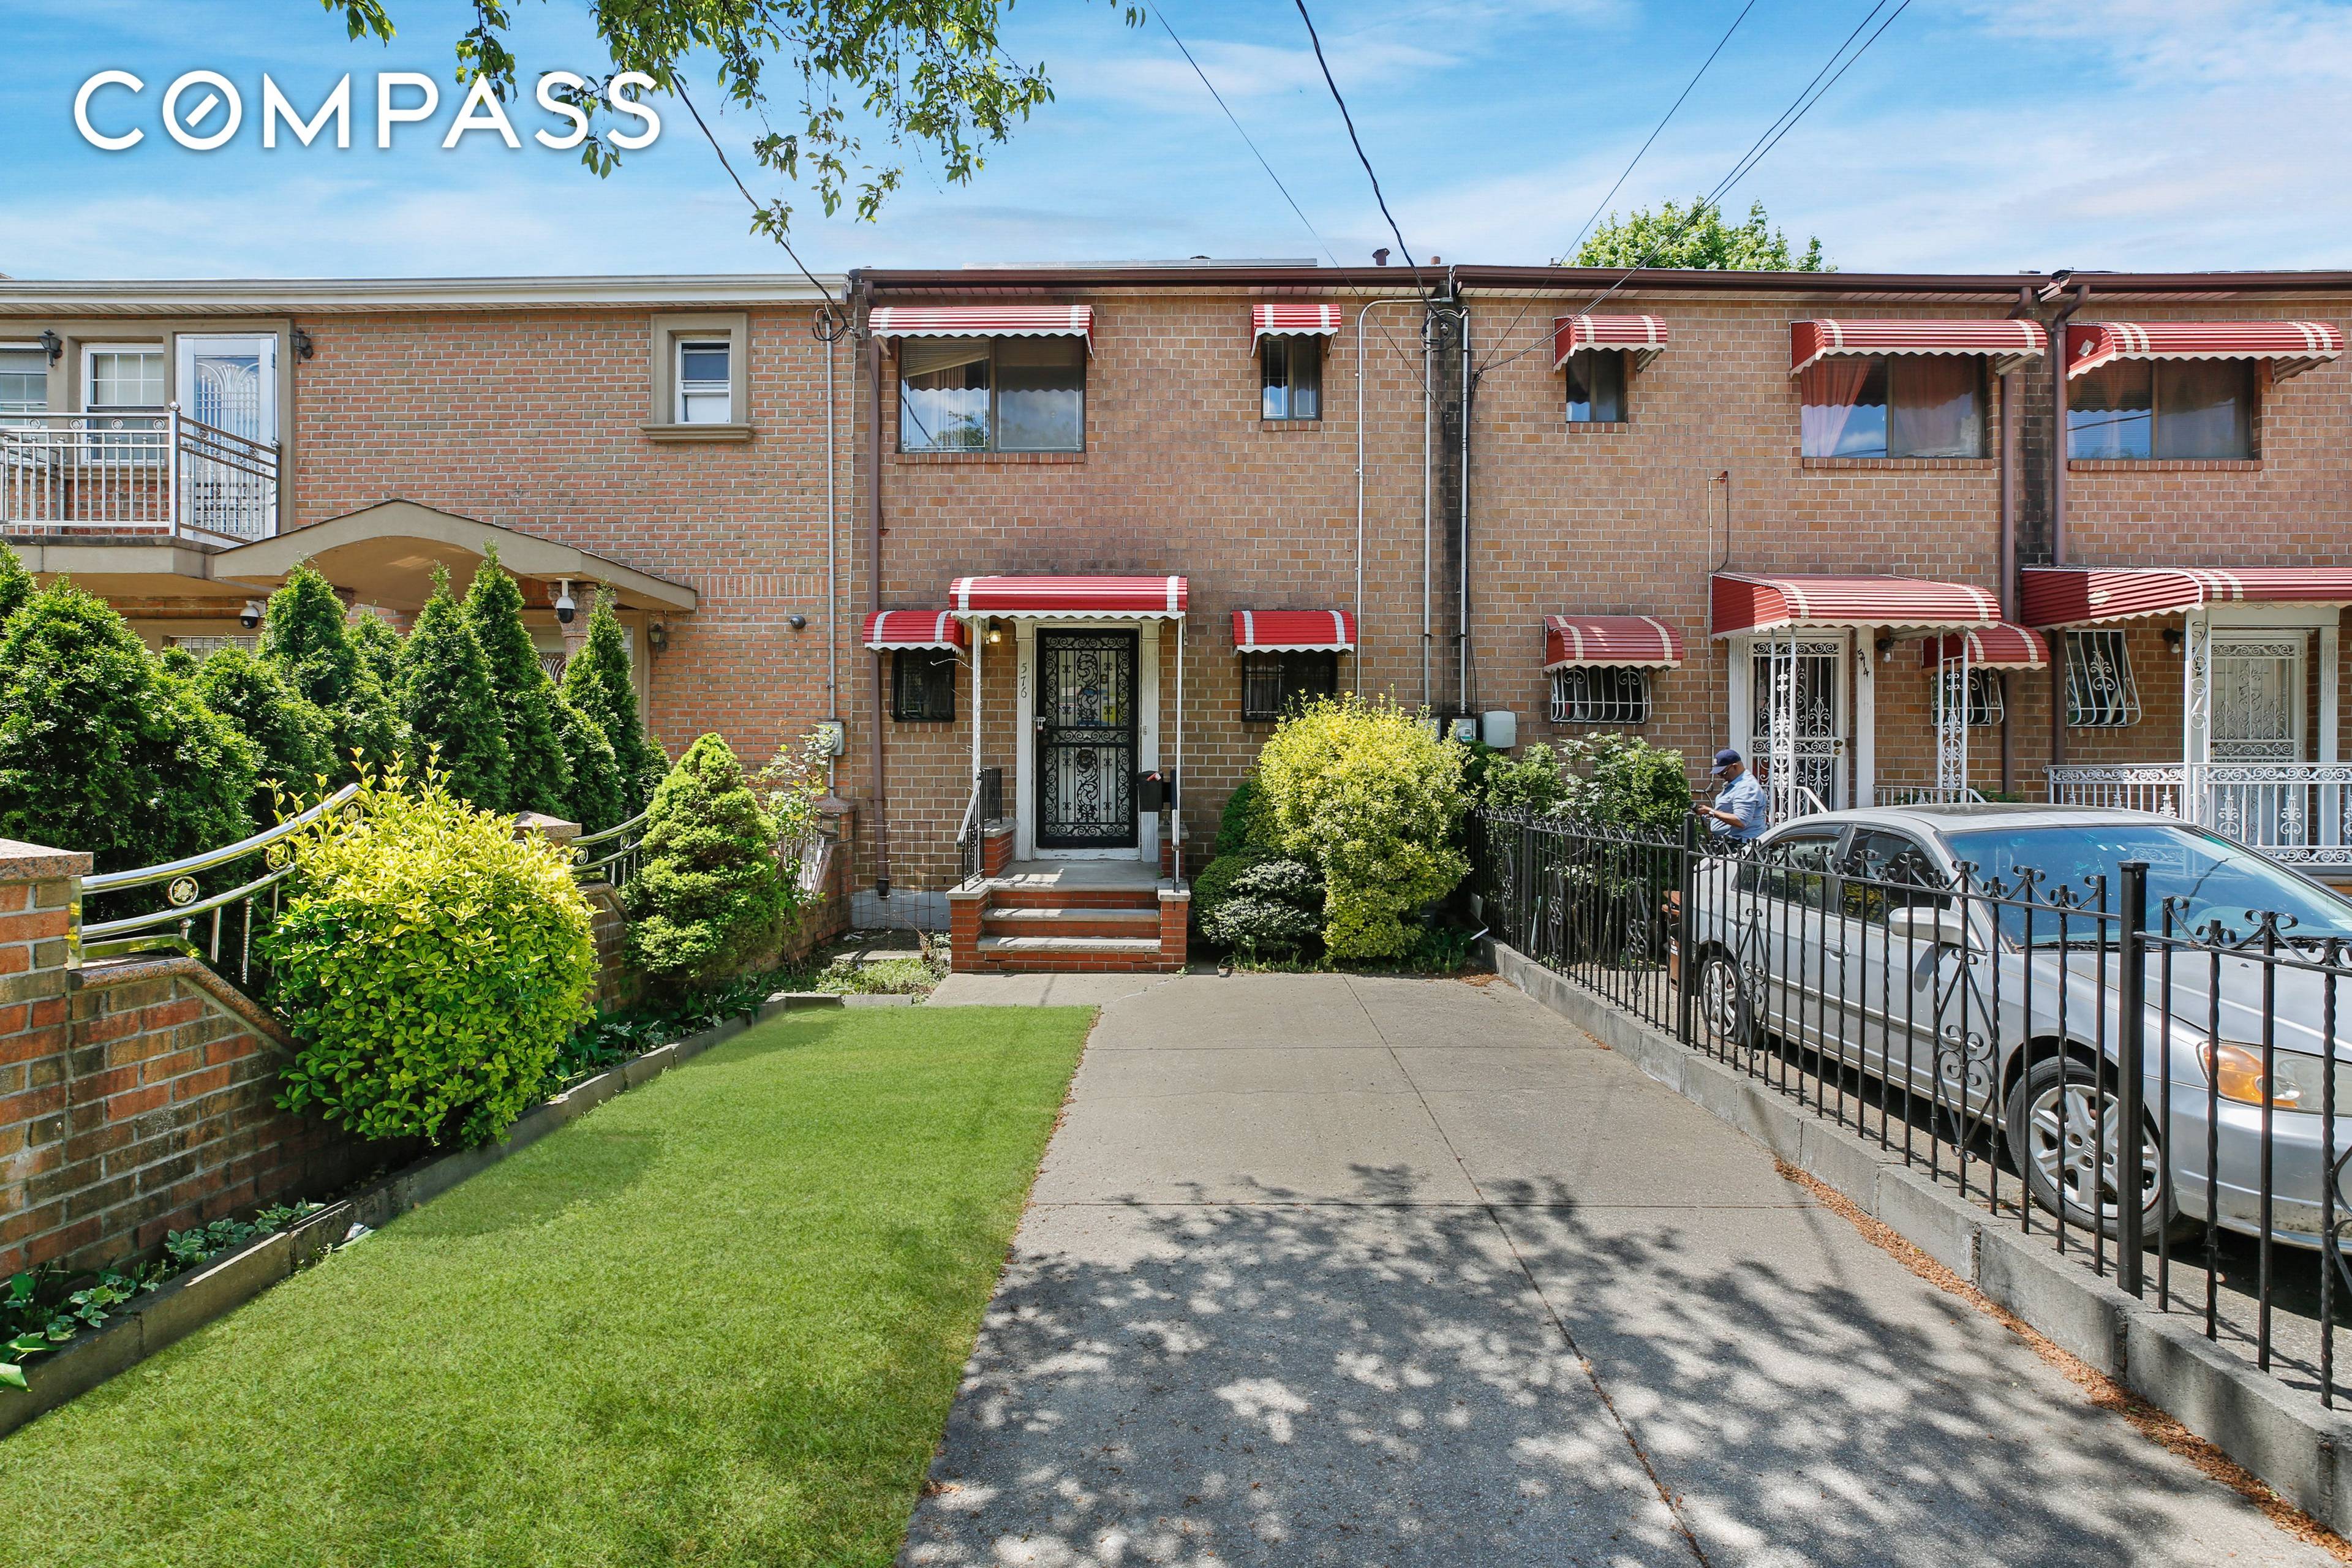 Presenting an urban oasis nestled in one of Brooklyn's most accessible neighborhoods just blocks from Lincoln Terrace Park and the 3 train which takes you directly into Manhattan.